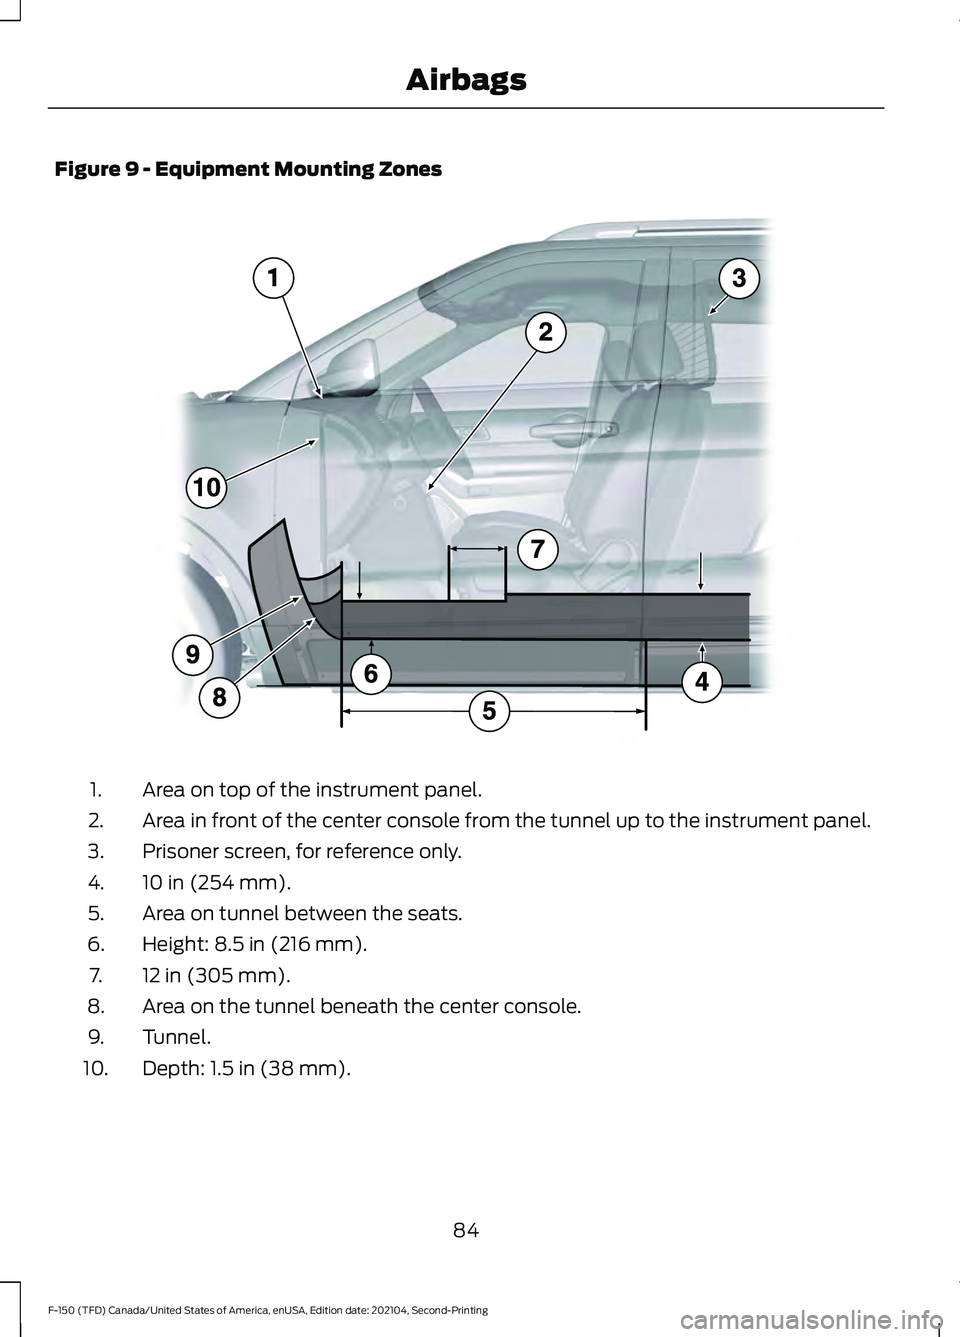 FORD F-150 2021  Owners Manual Figure 9 - Equipment Mounting Zones
Area on top of the instrument panel.
1.
Area in front of the center console from the tunnel up to the instrument panel.
2.
Prisoner screen, for reference only.
3.
1